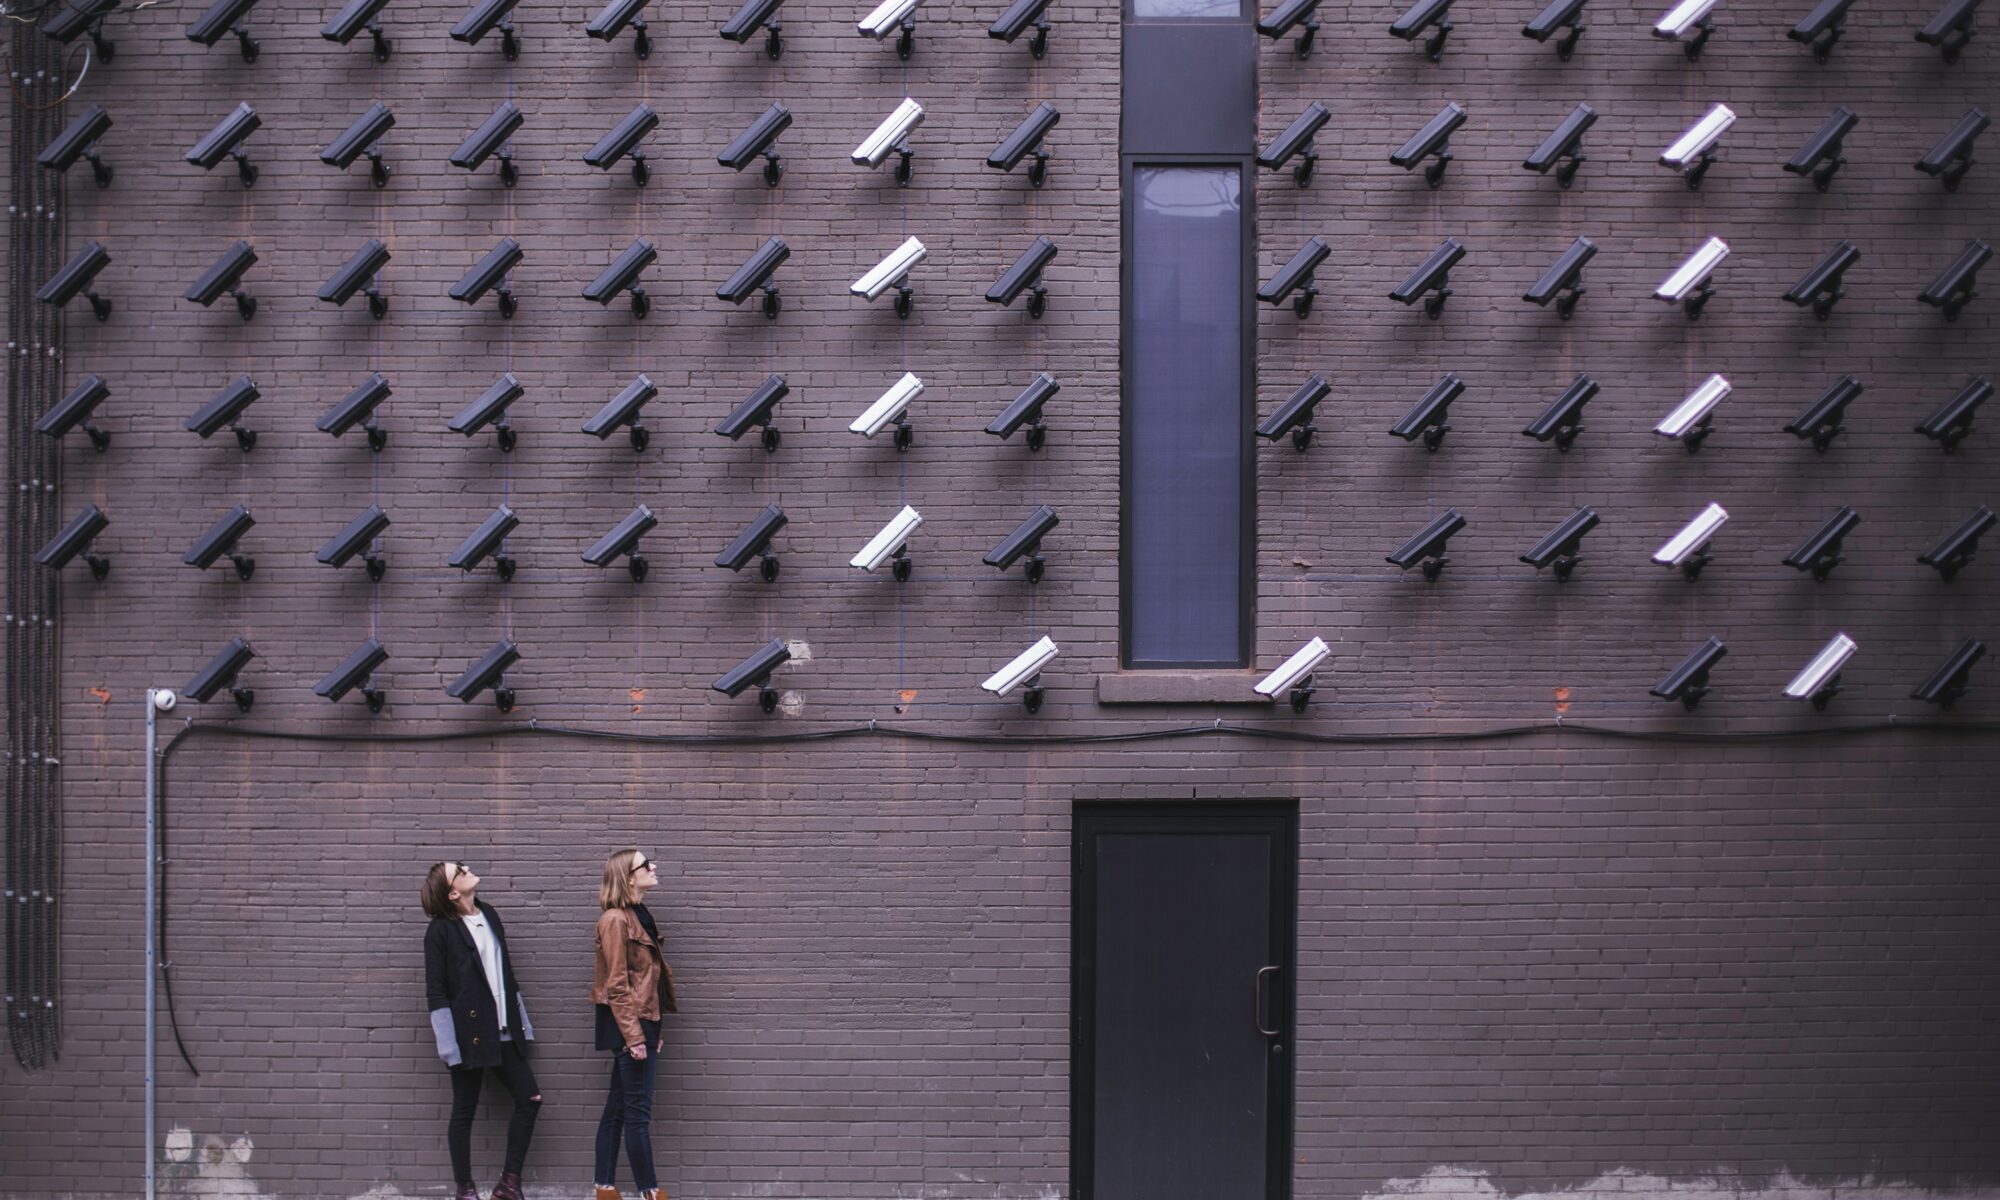 Two people looking up standing under a wall of CCTV cameras